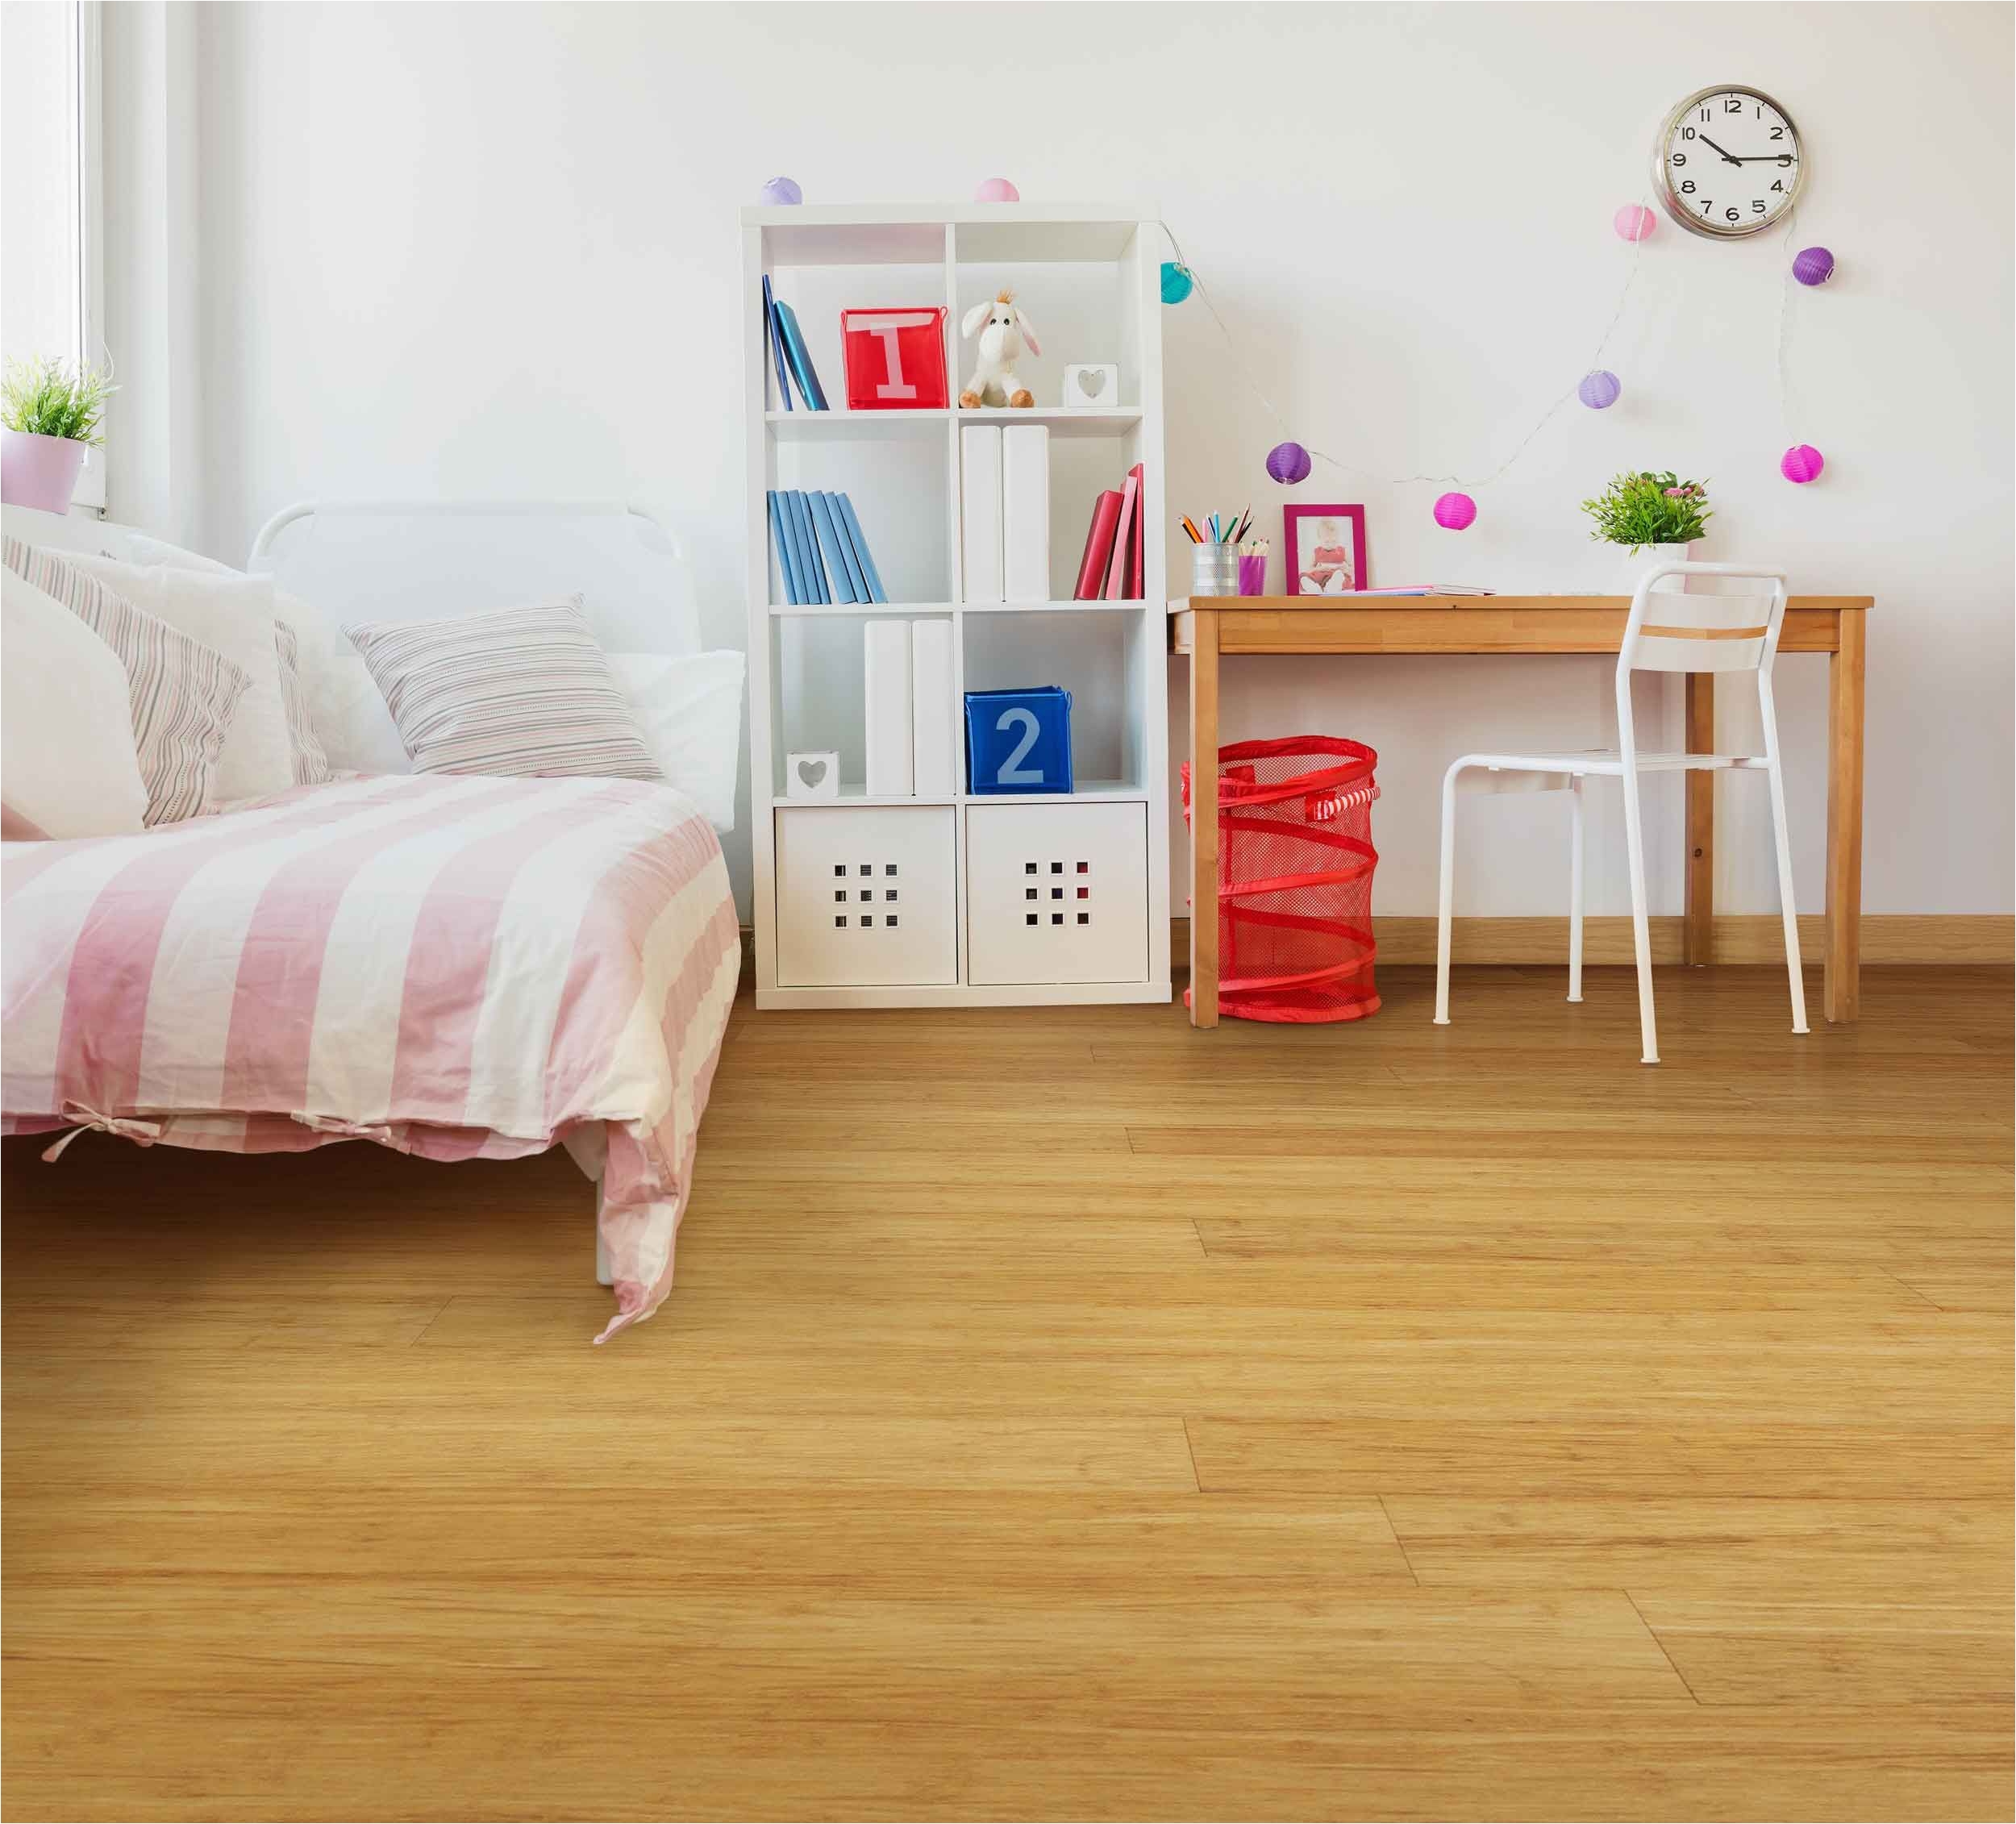 Bona Floor Products Adelaide solid Brushed Natural Strand Woven 135mm Uniclica Bona Coated Bamboo